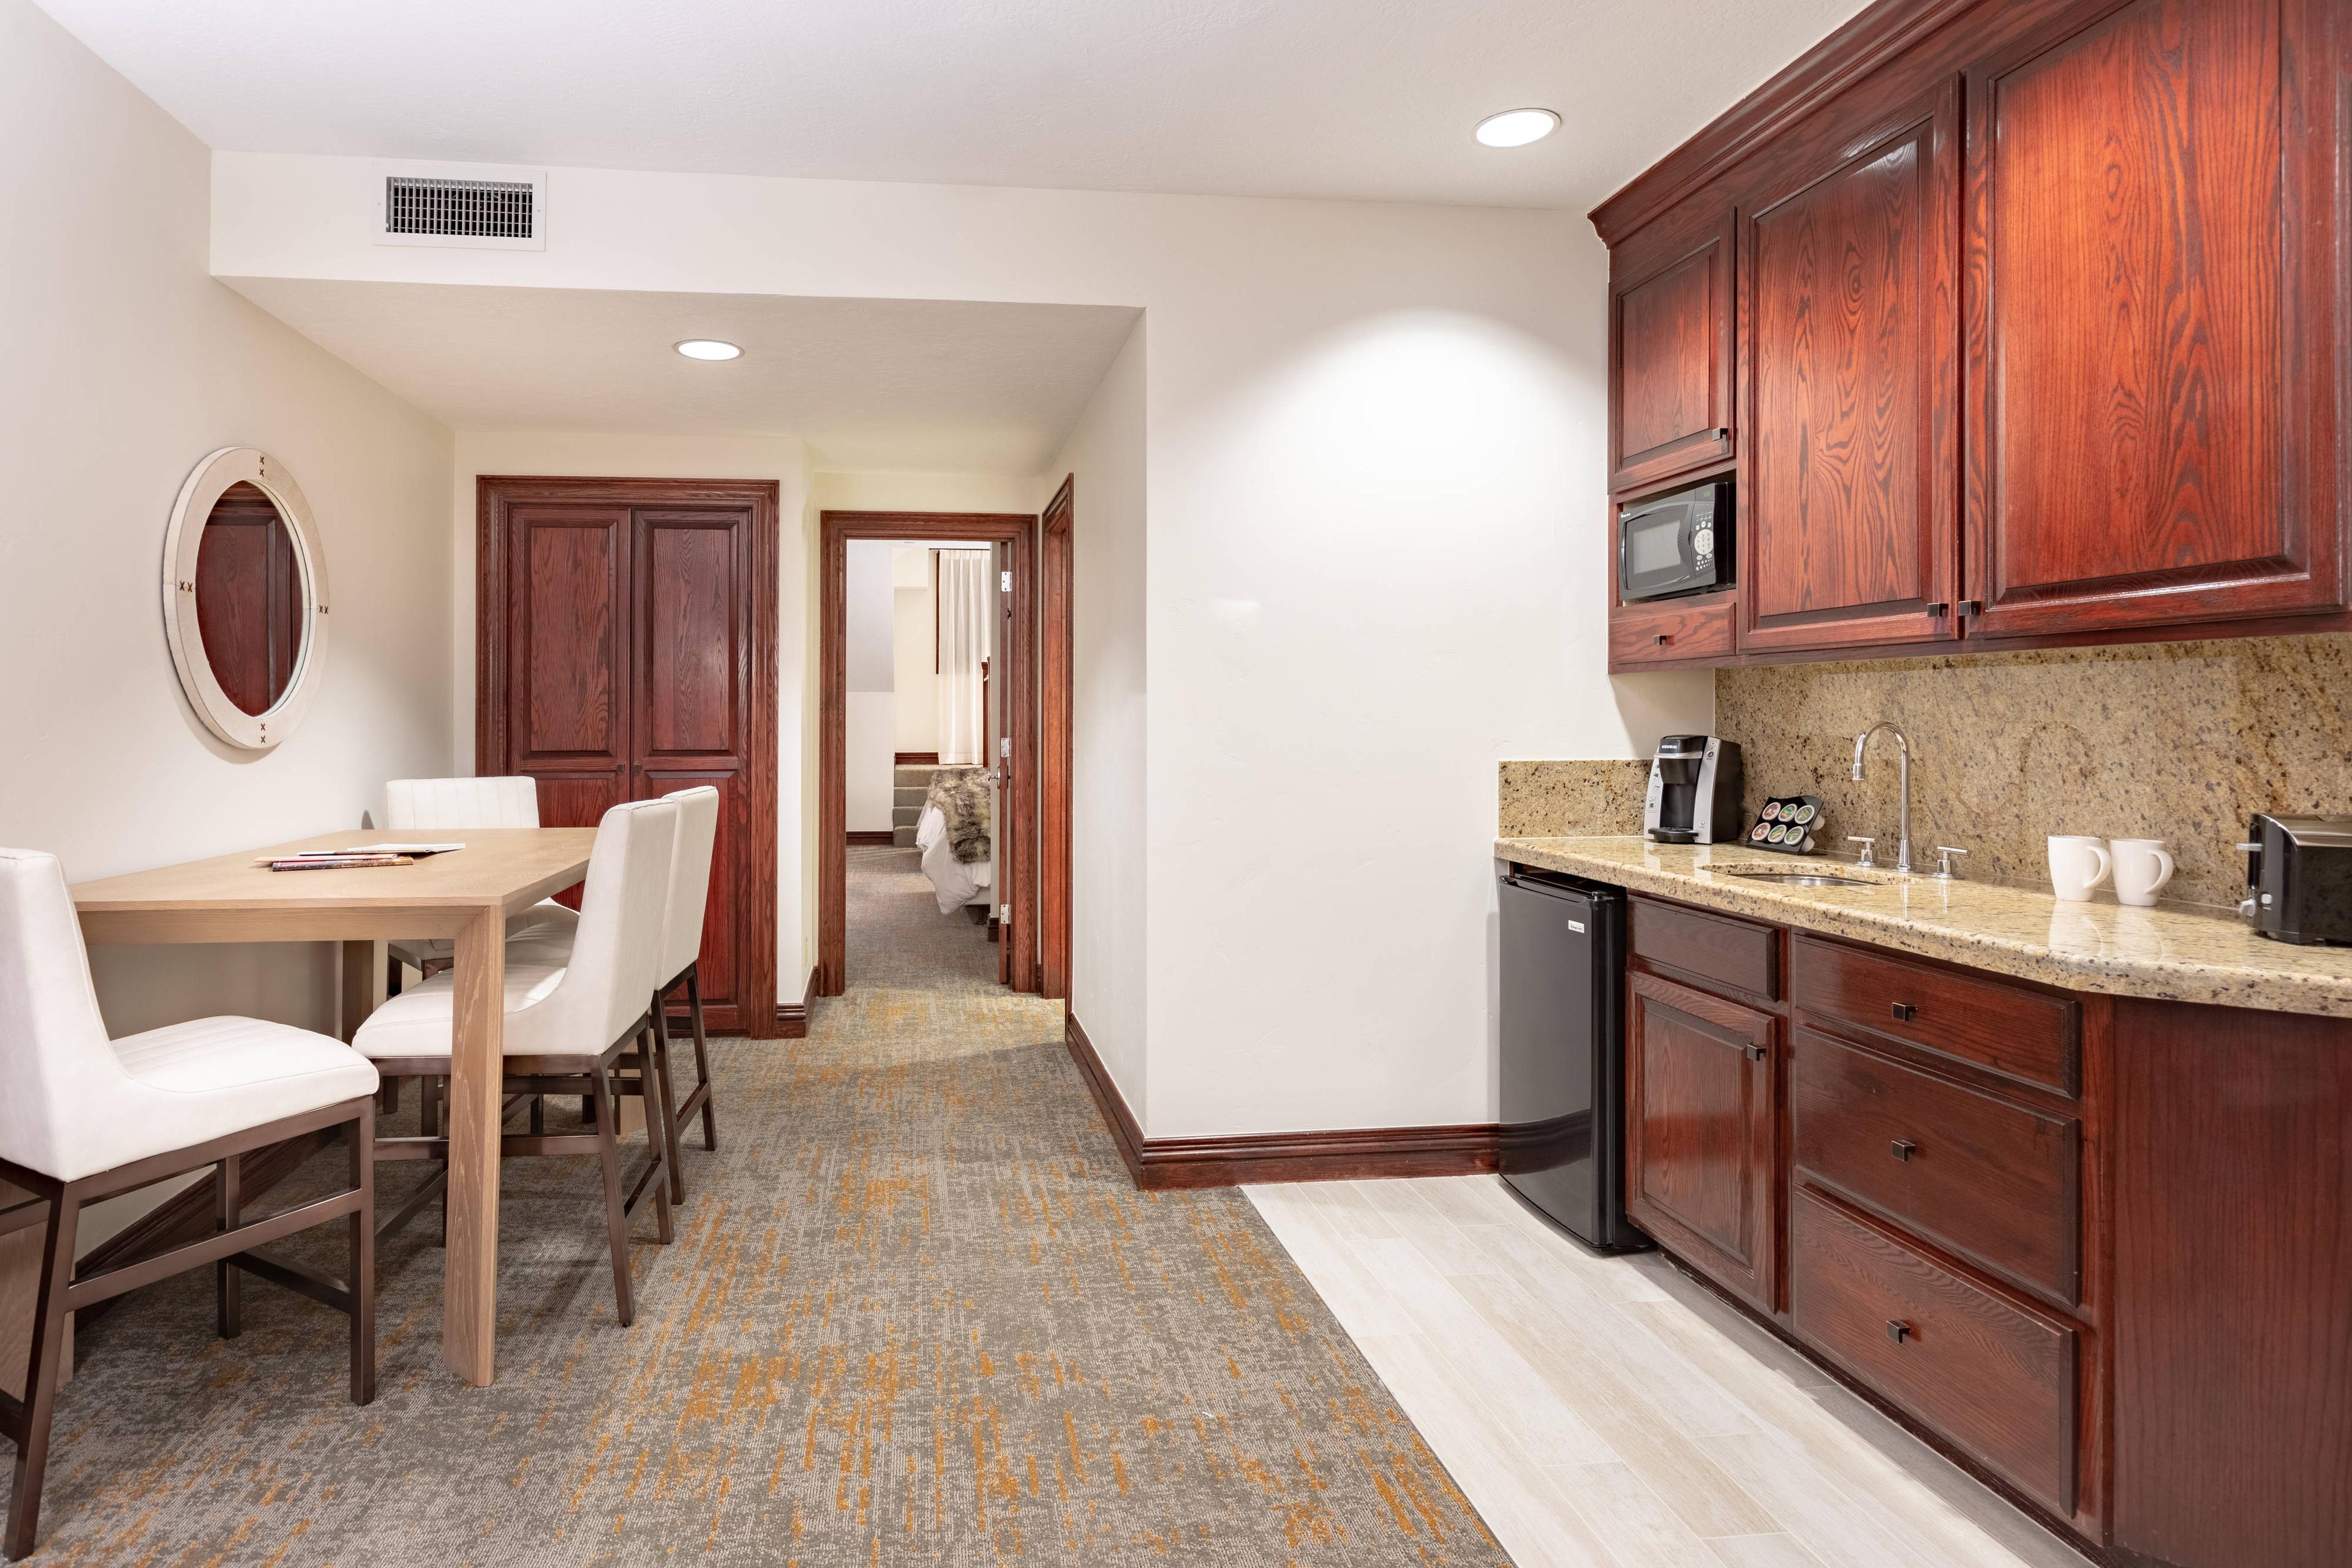 Our spacious double-queen suite comes with a kitchenette complete with a microwave, mini-refrigerator, coffee maker and seating area for convenient, in-room dining.